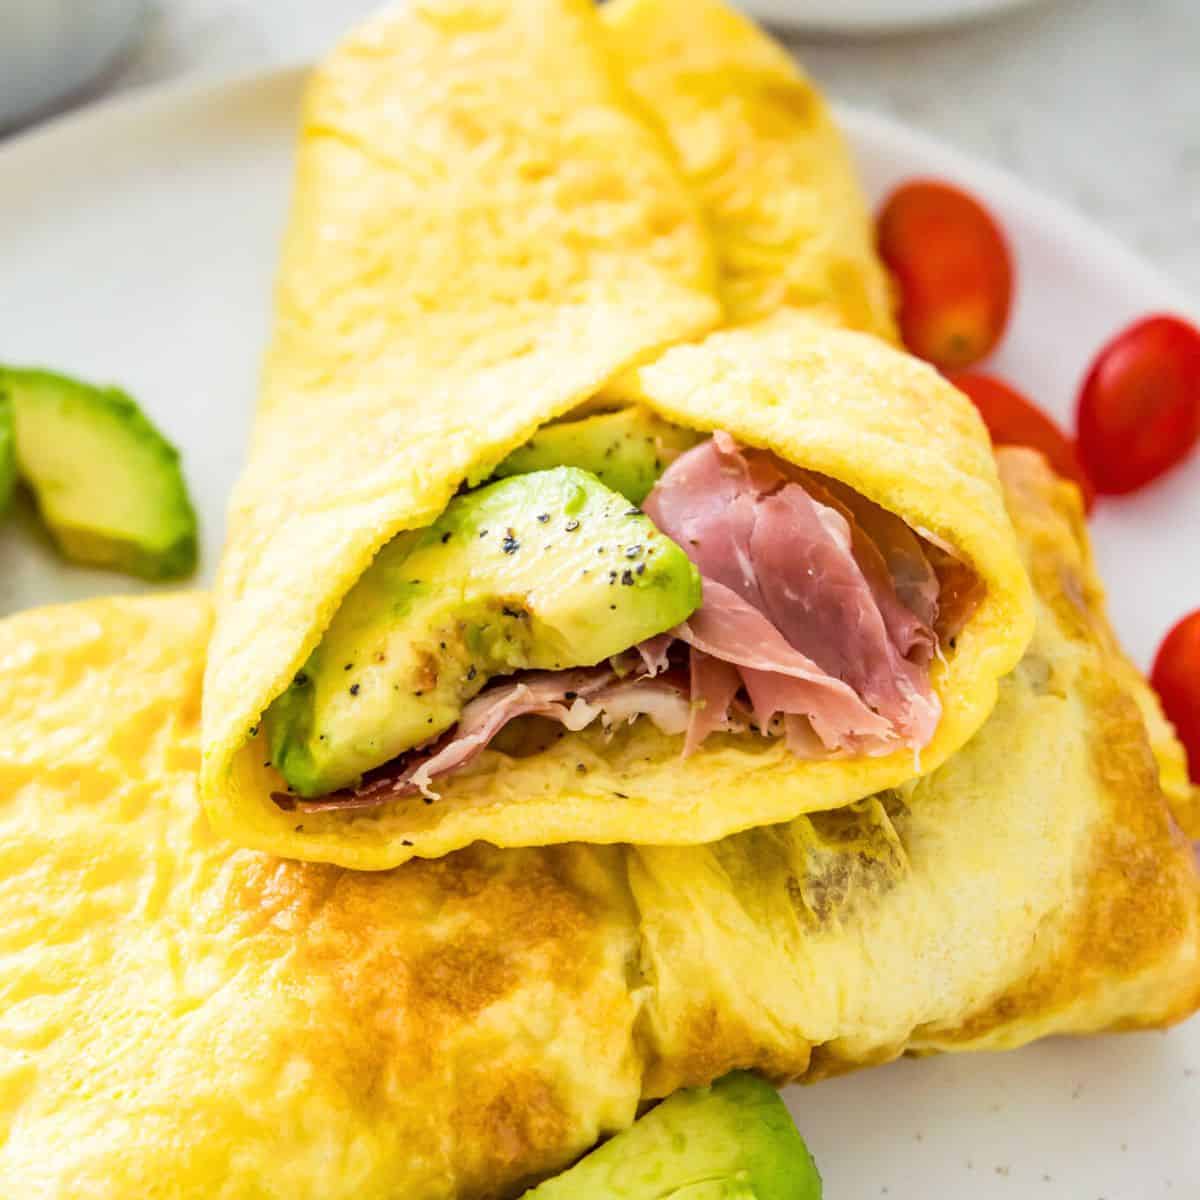 A delicious egg wrap filled with avocado and ham on a white plate with fresh avocado slices and cherry tomatoes.